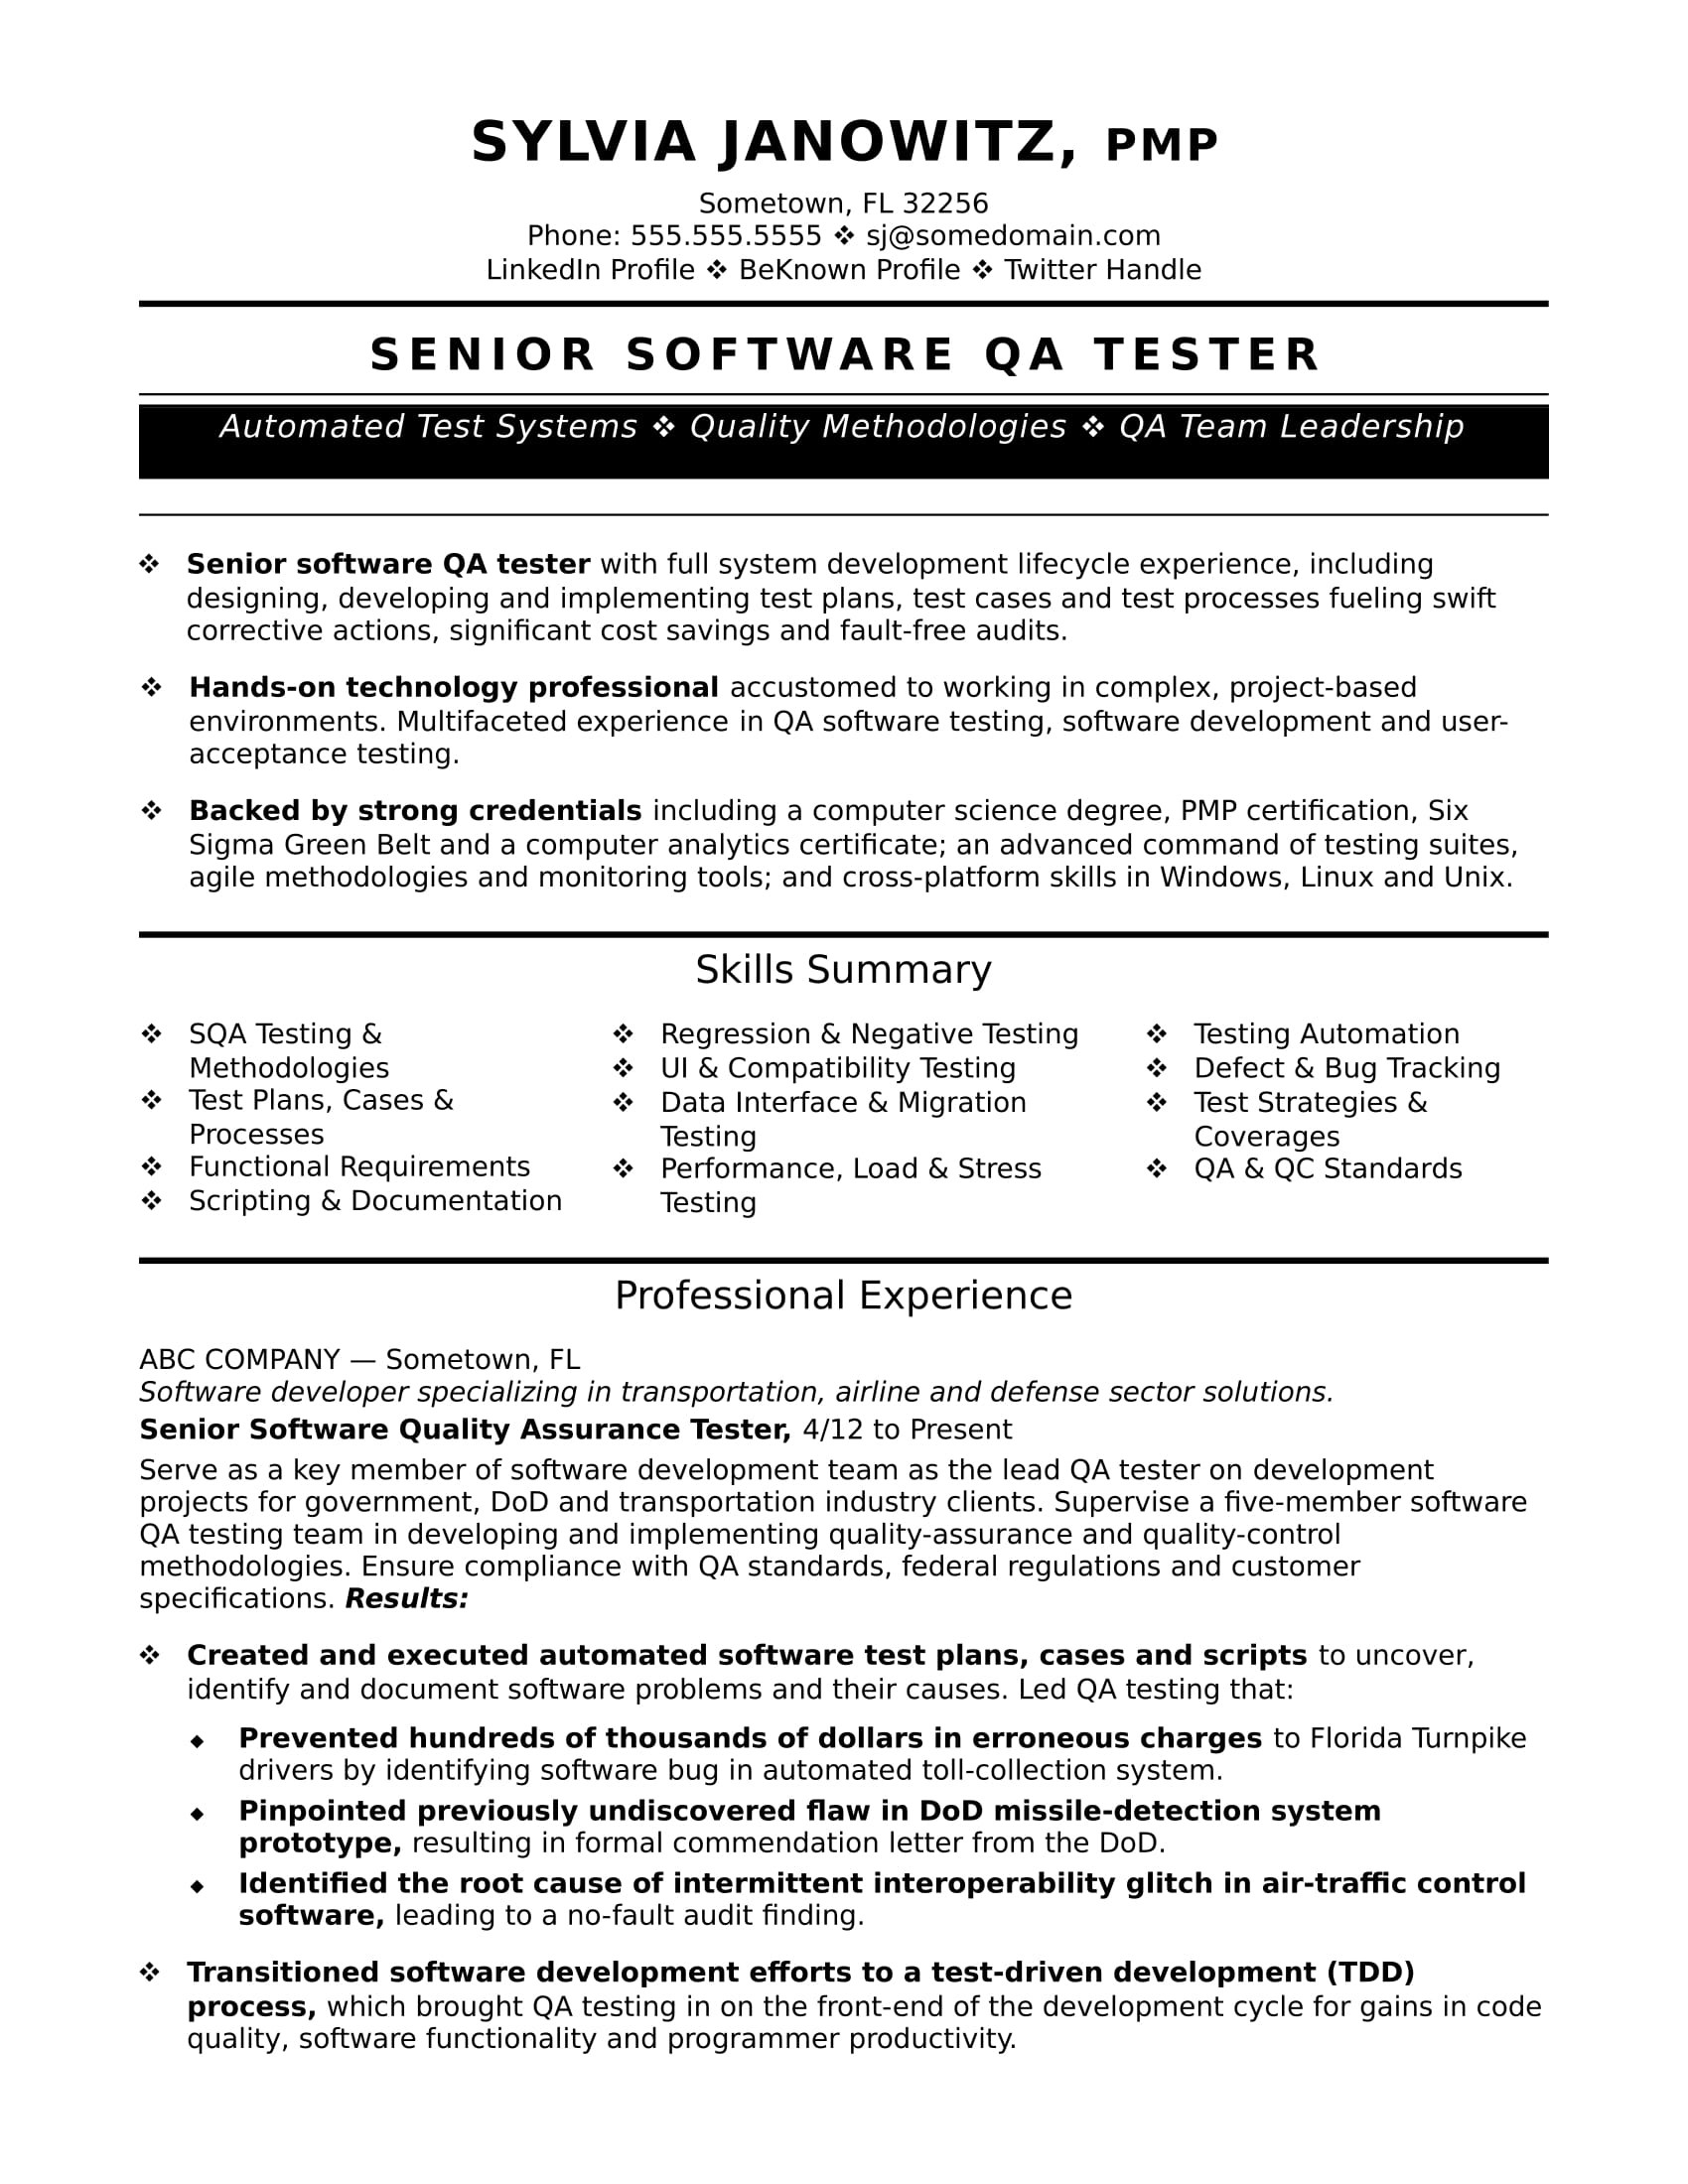 sample resume qa software tester experienced